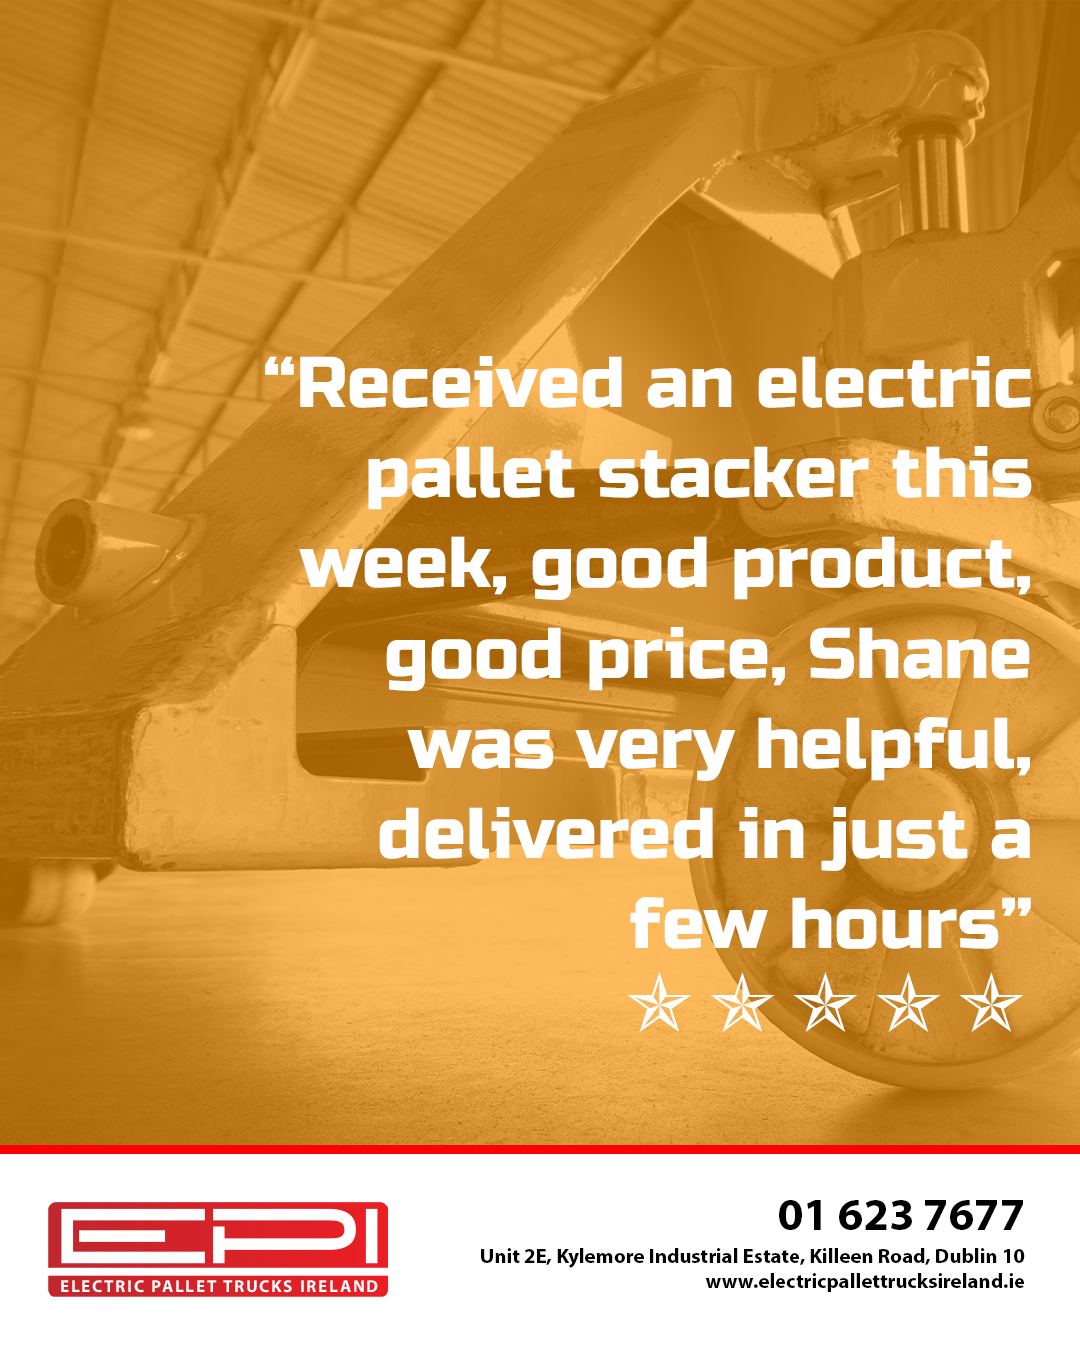 Check out our 5 star google reviews over on Electric Pallet Trucks Ireland.